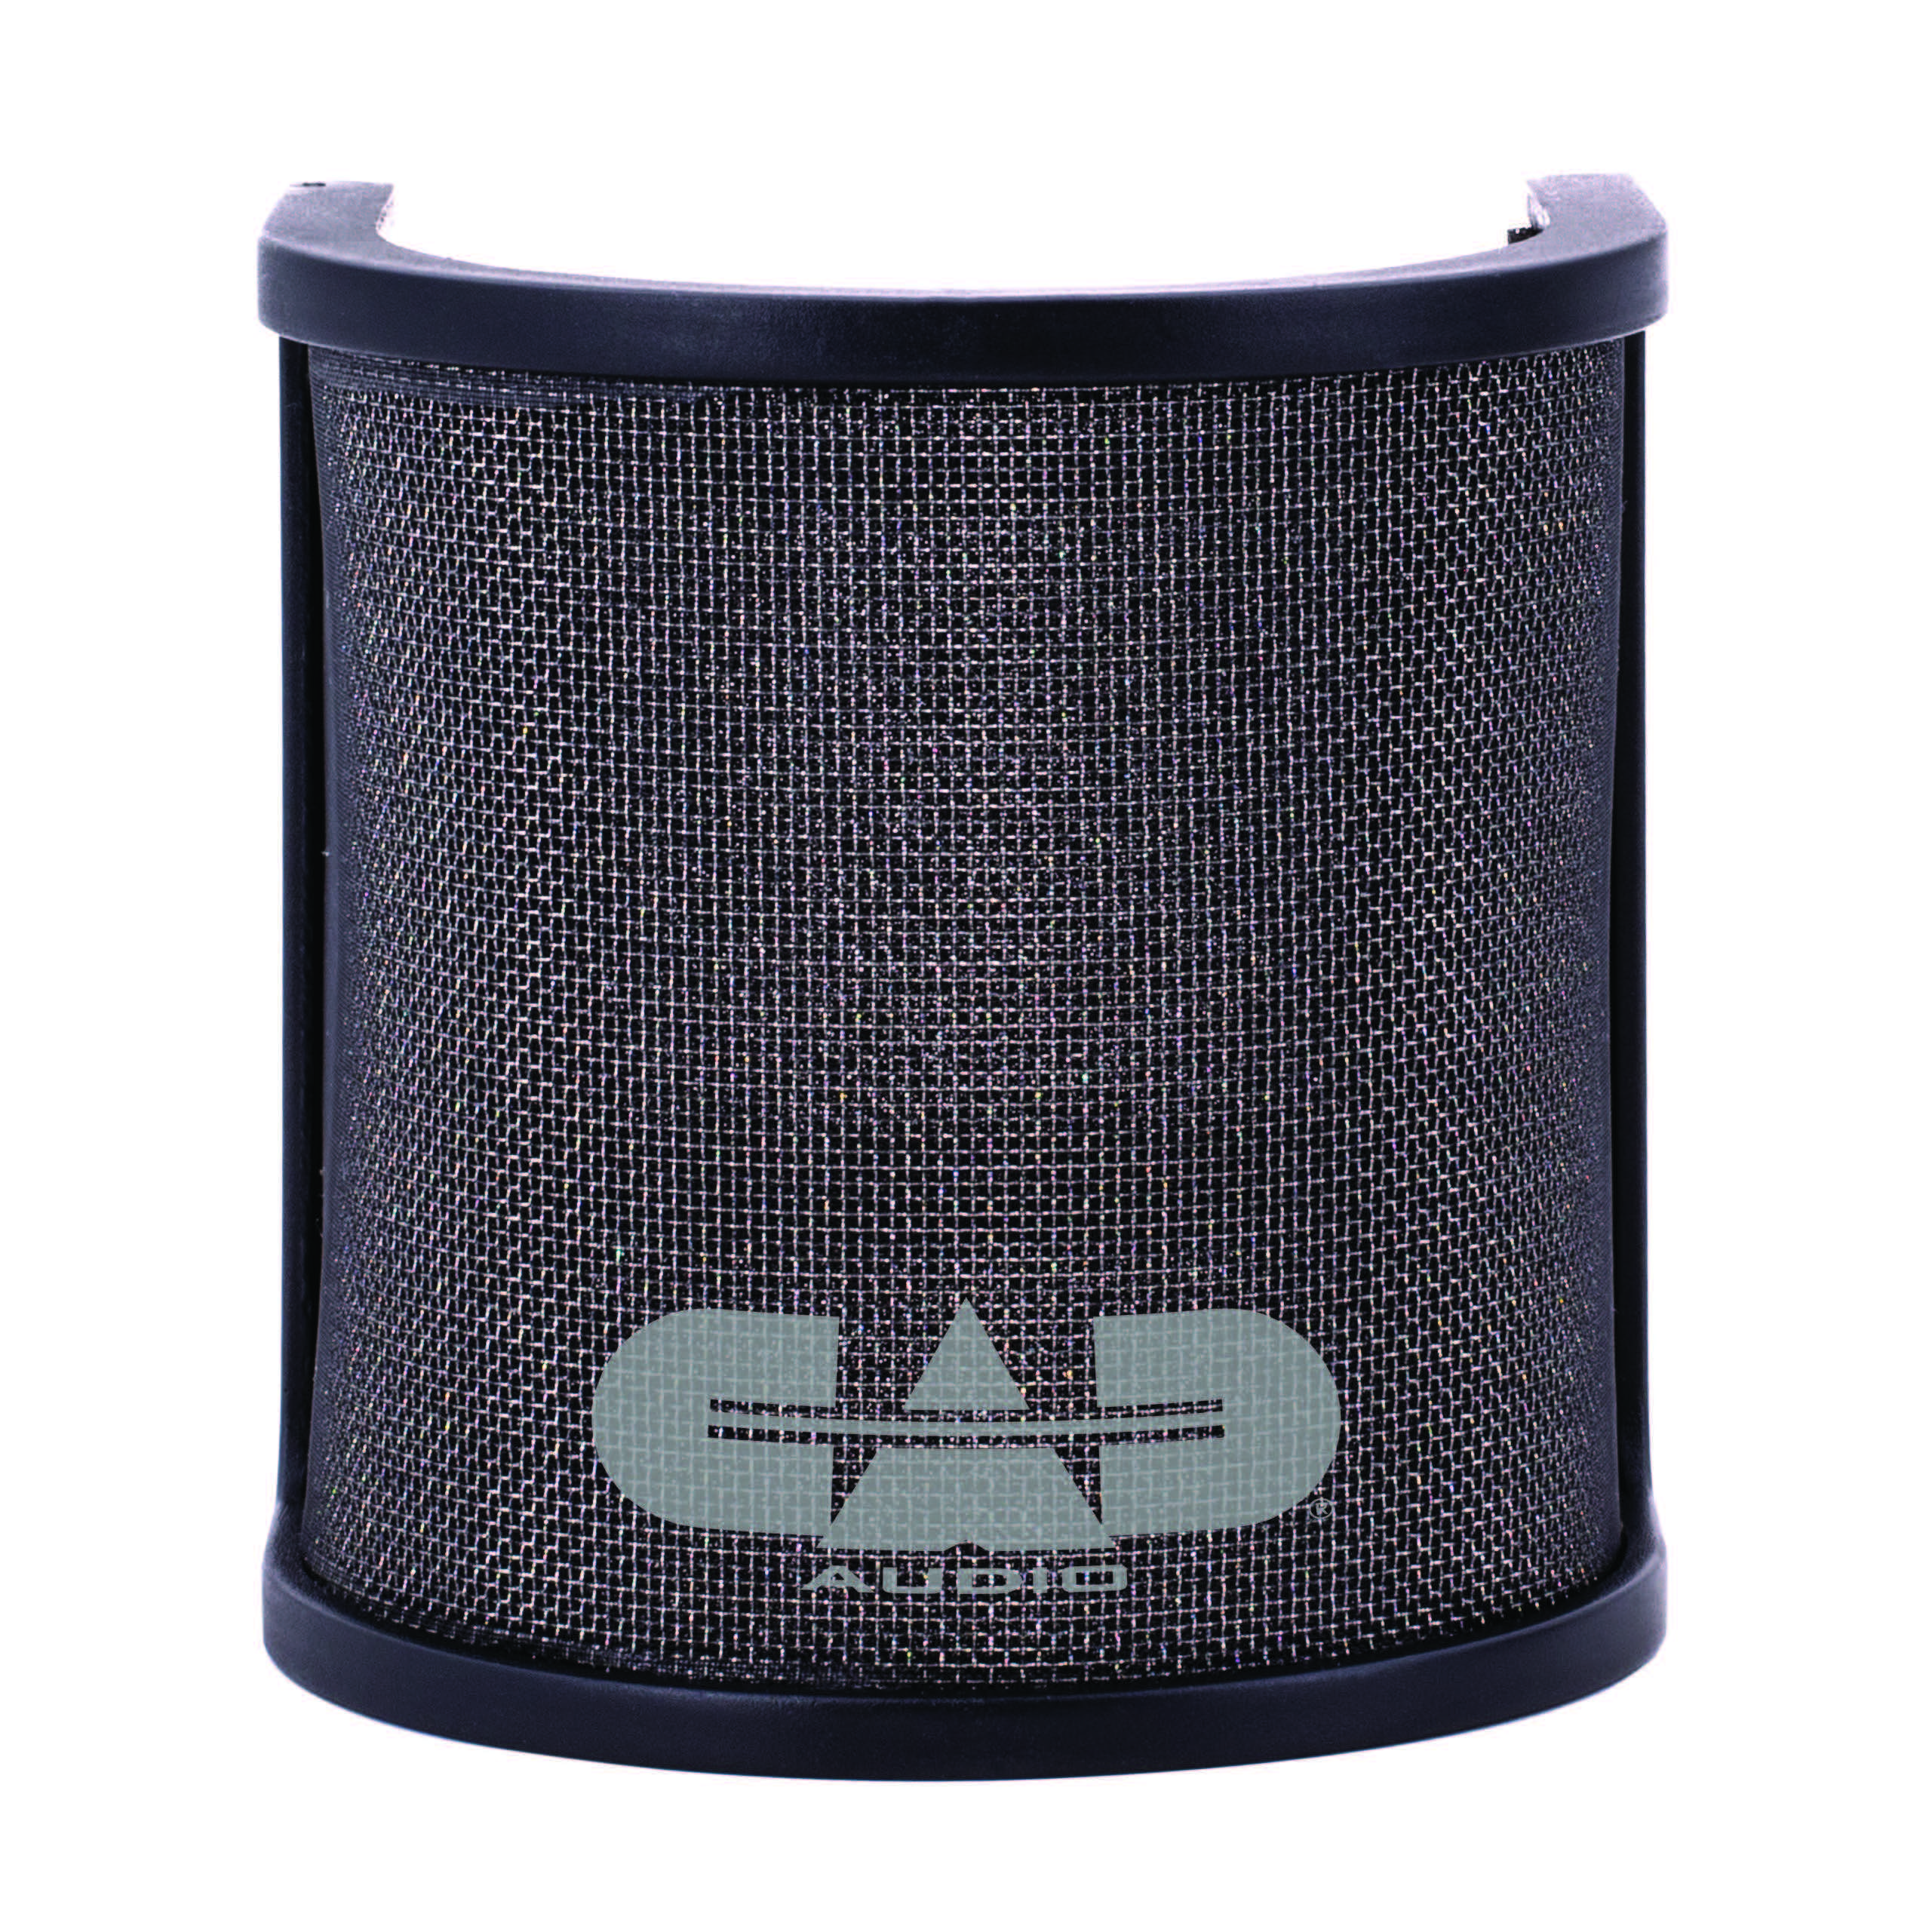 VP3 Pop Filter | CAD AUDIO - The Brand Used by Professionals